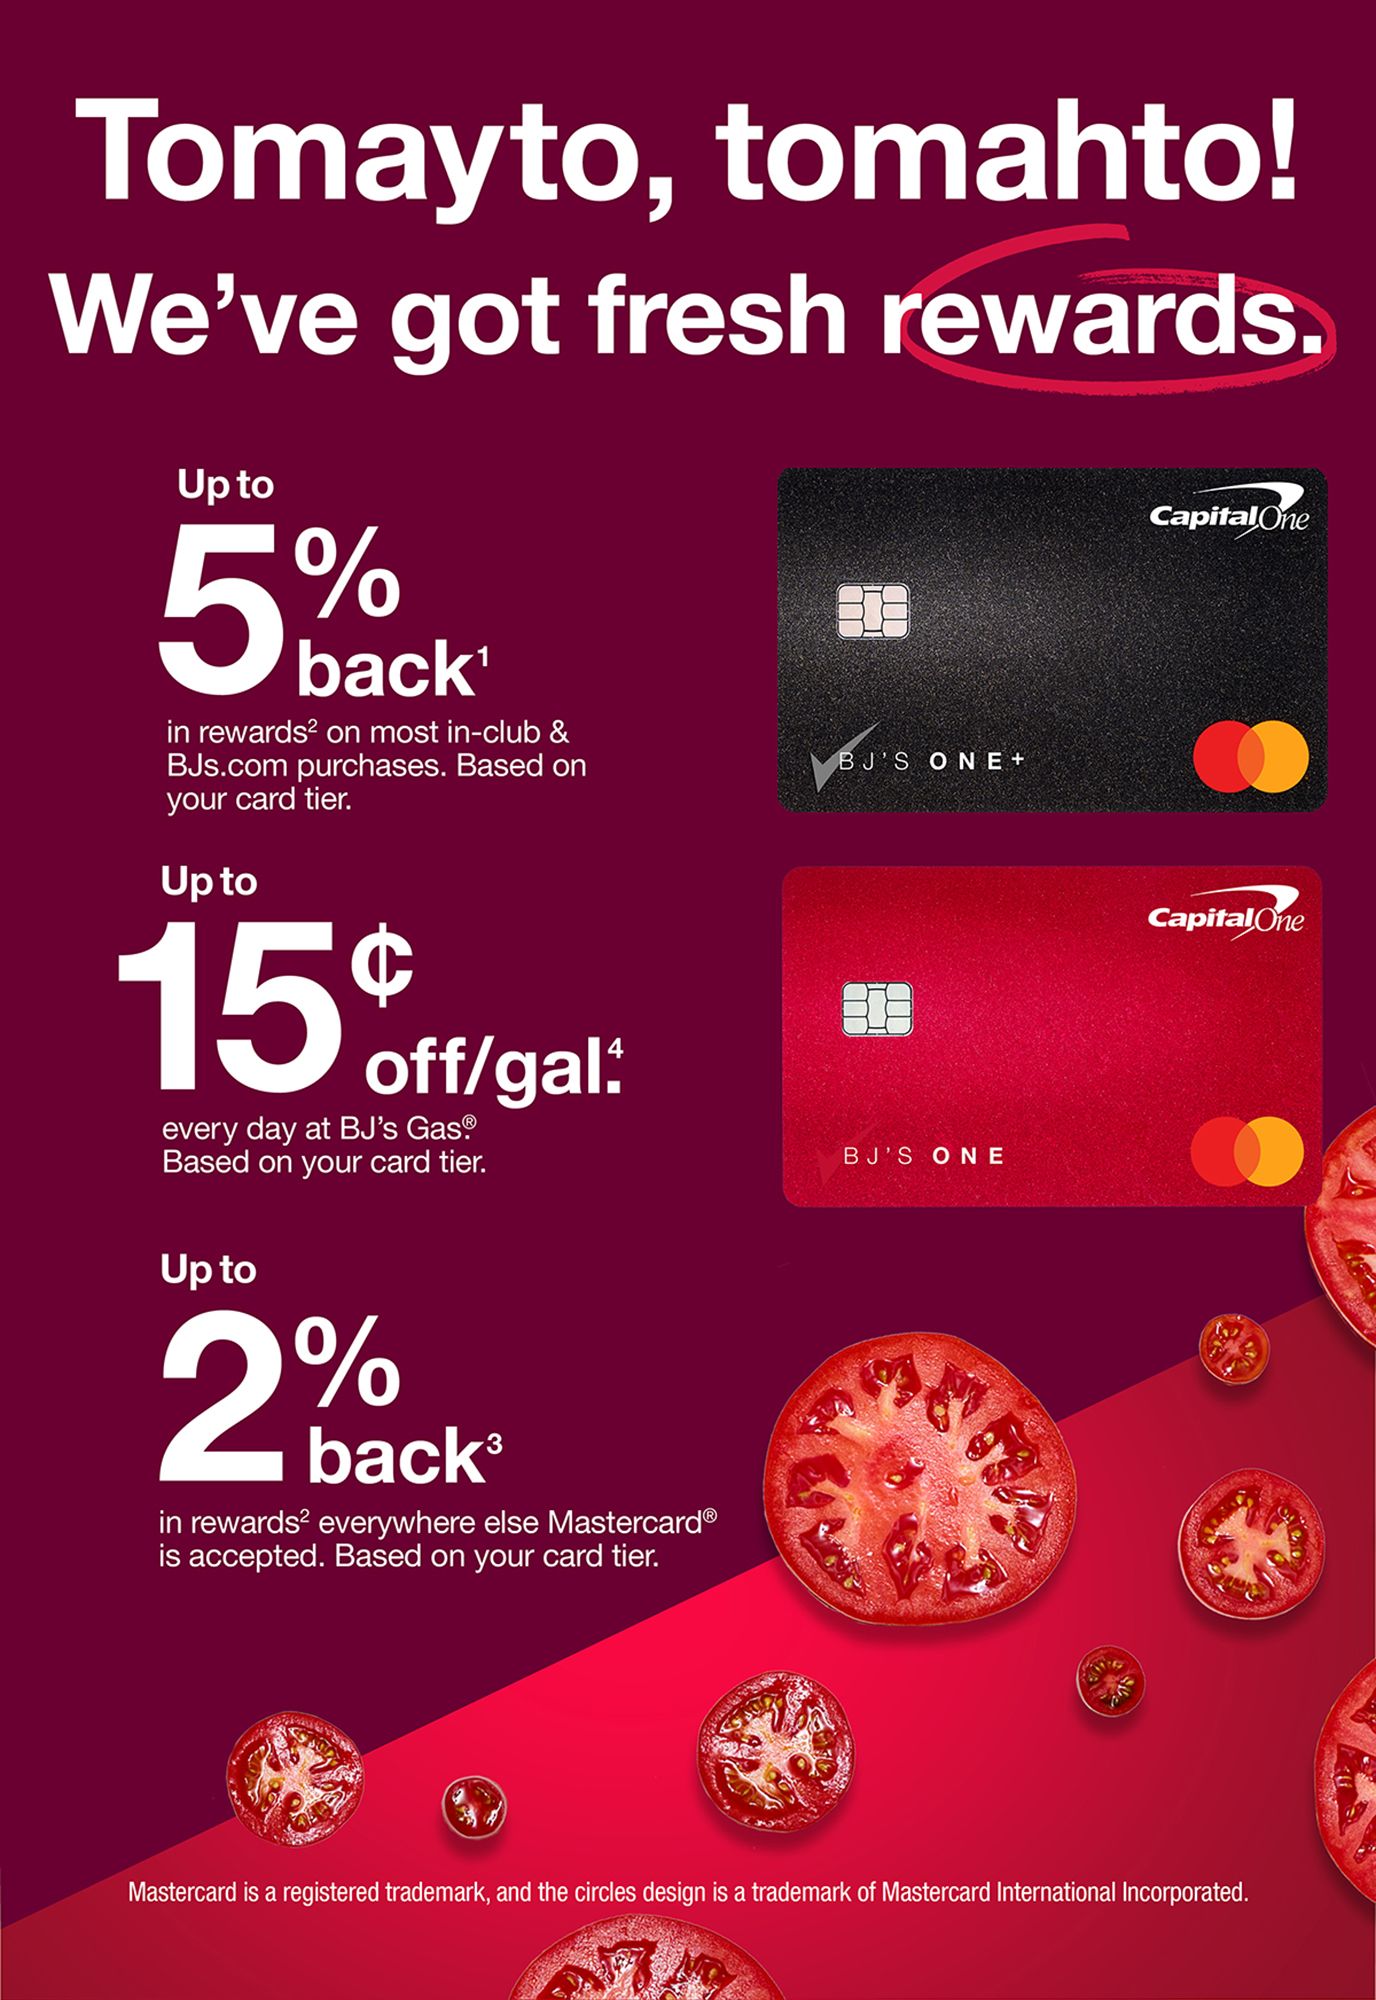 Tomayto, Tomahto - we've got fresh rewards. Up to 5% back1 in rewards on most in-club and BJs.com purchases. Based on your card tier. Up to 15¢ off/gal4. Every day at BJ's Gas®. Based on your card tier. Up to 2% back2 in rewards everywhere else Mastercard® is accepted. Based on your card tier.